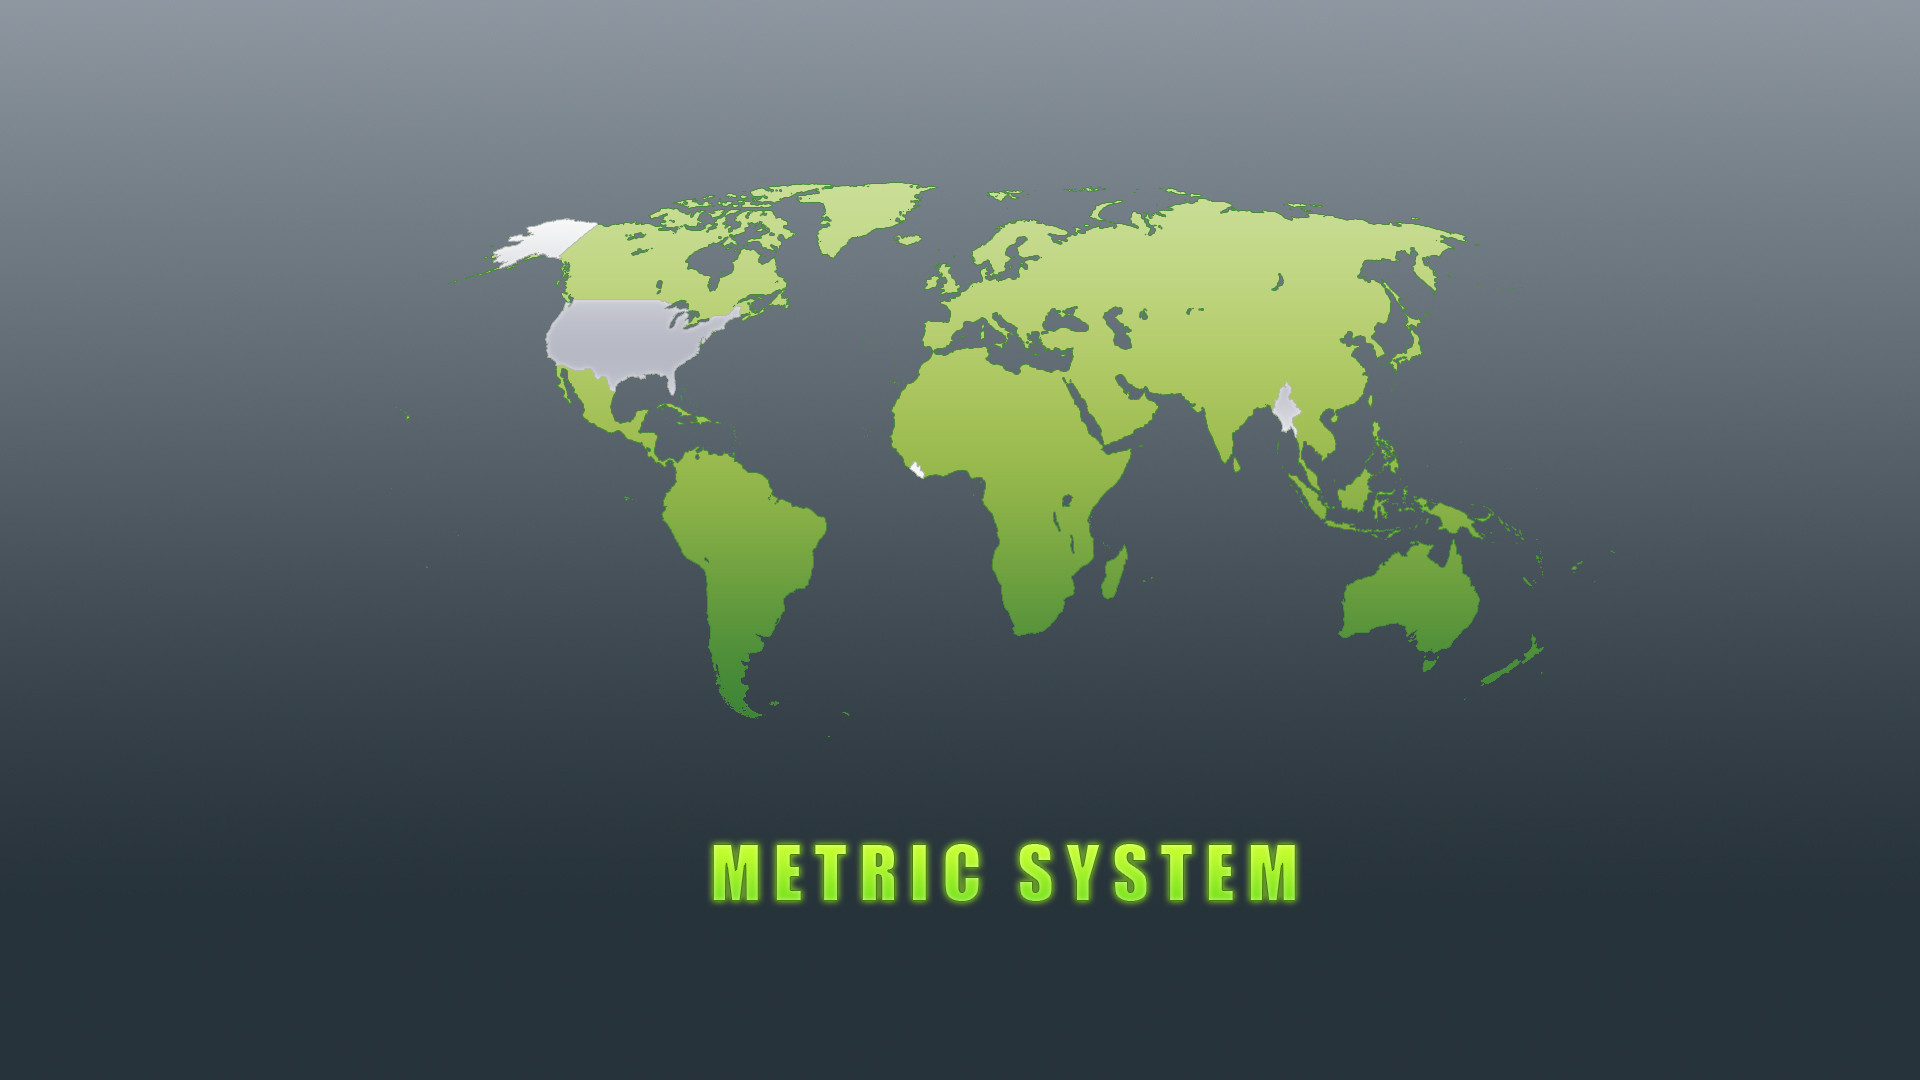 Metric System Posted In The Wallpaper Munity